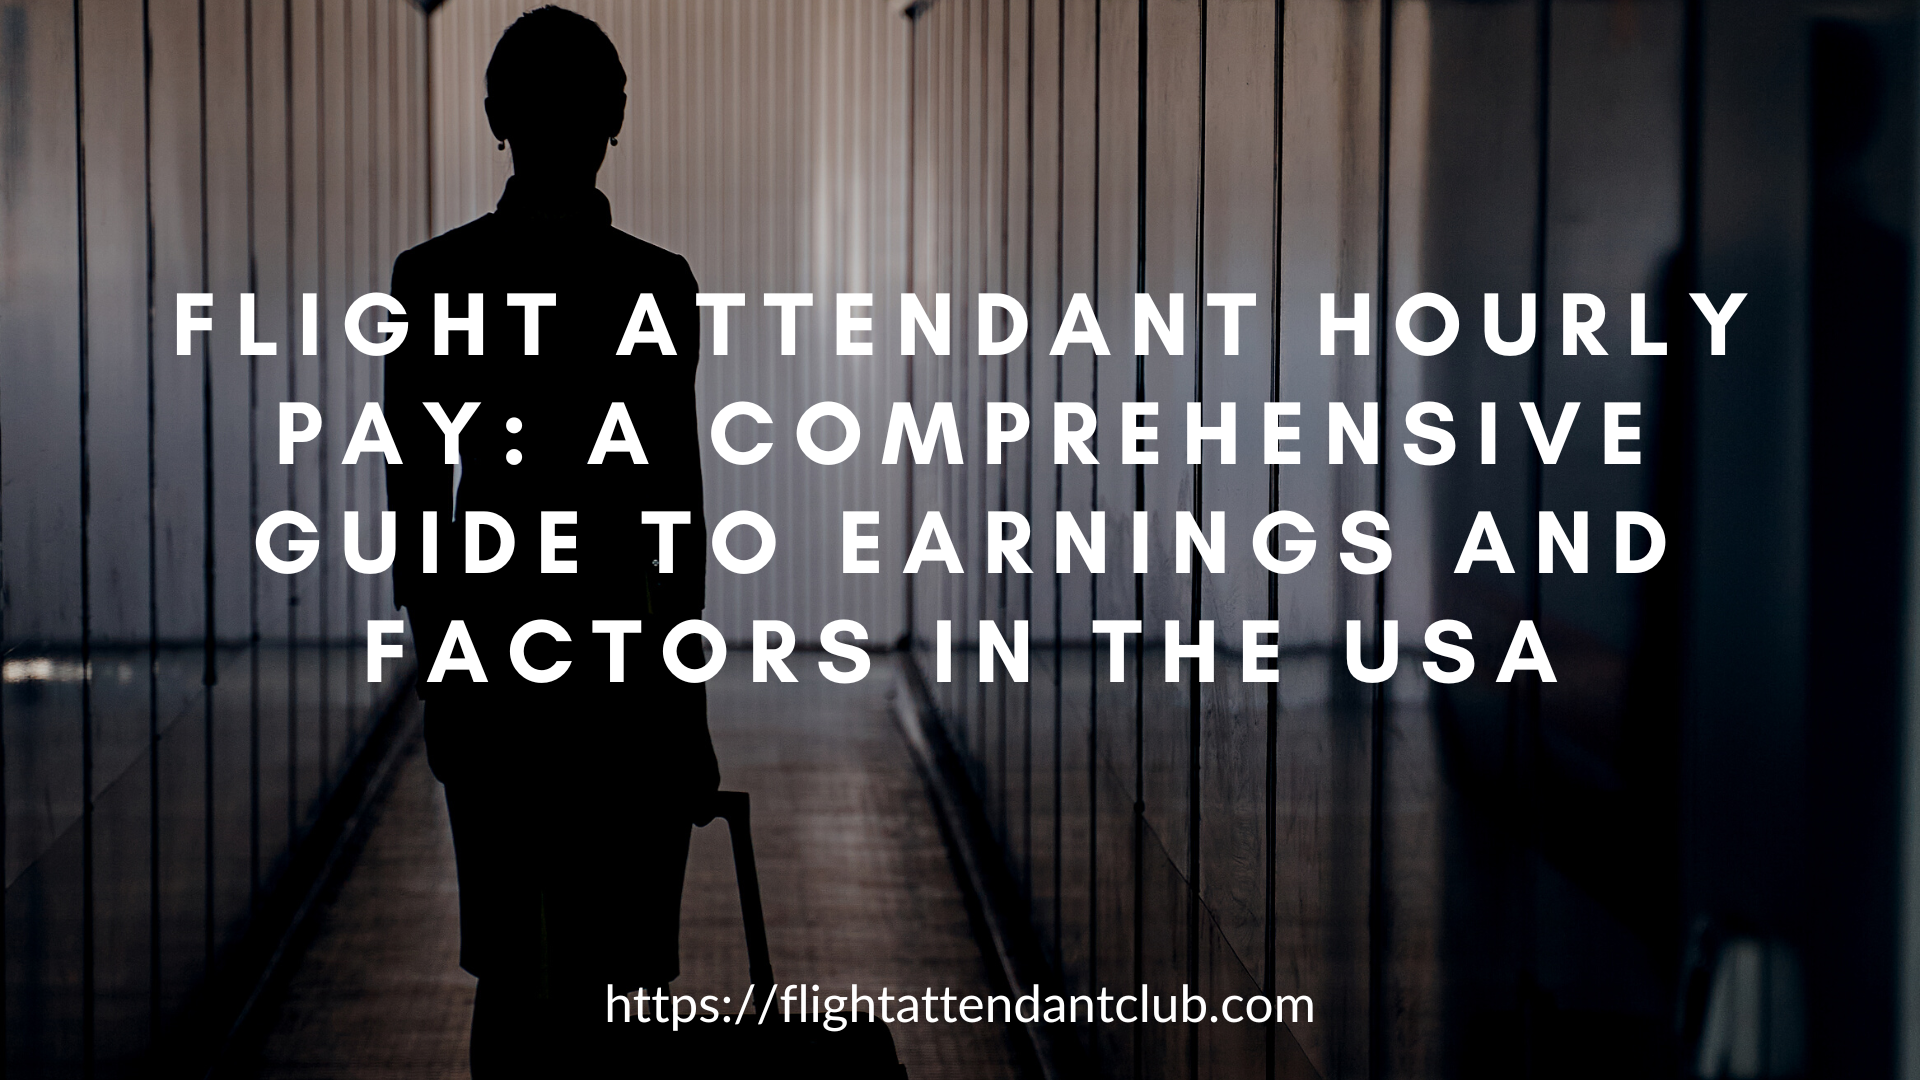 Flight Attendant Hourly Pay: A Comprehensive Guide to Earnings and Factors in the USA